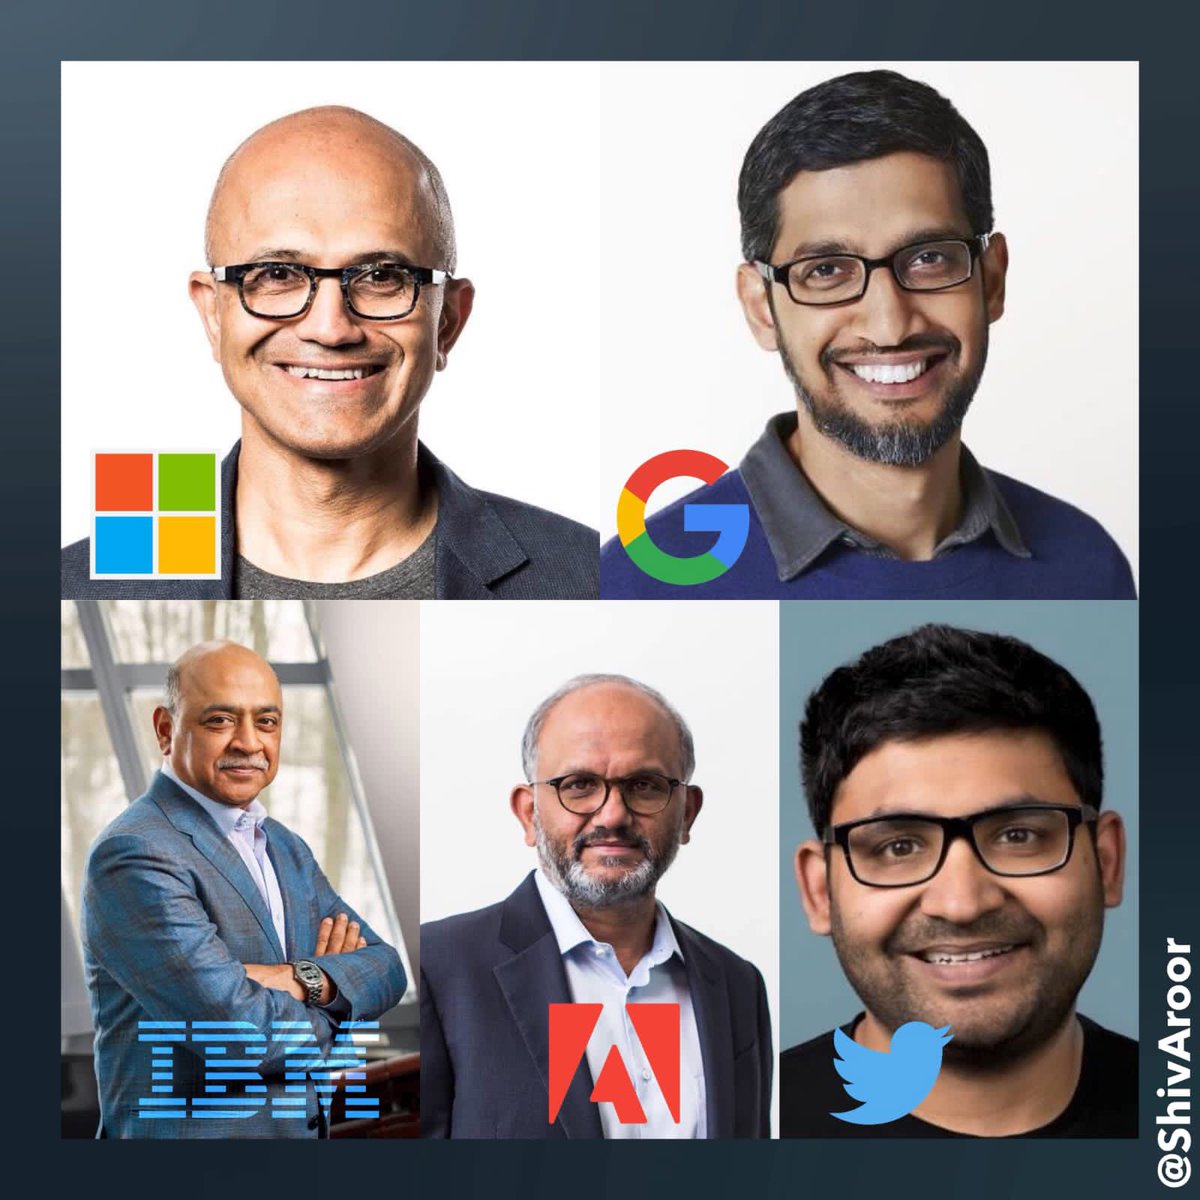 Another great moment for India's depth of talent. Congrats @paraga on your unanimous selection as CEO. You will do @Twitter & @jack proud. After Microsoft, Google,IBM,Adobe,Flex, VMware & more, yet another Indian rises to lead the digital world. @SavvyAhmedabad @ASSOCHAM4India https://t.co/2WPbAIyXgB